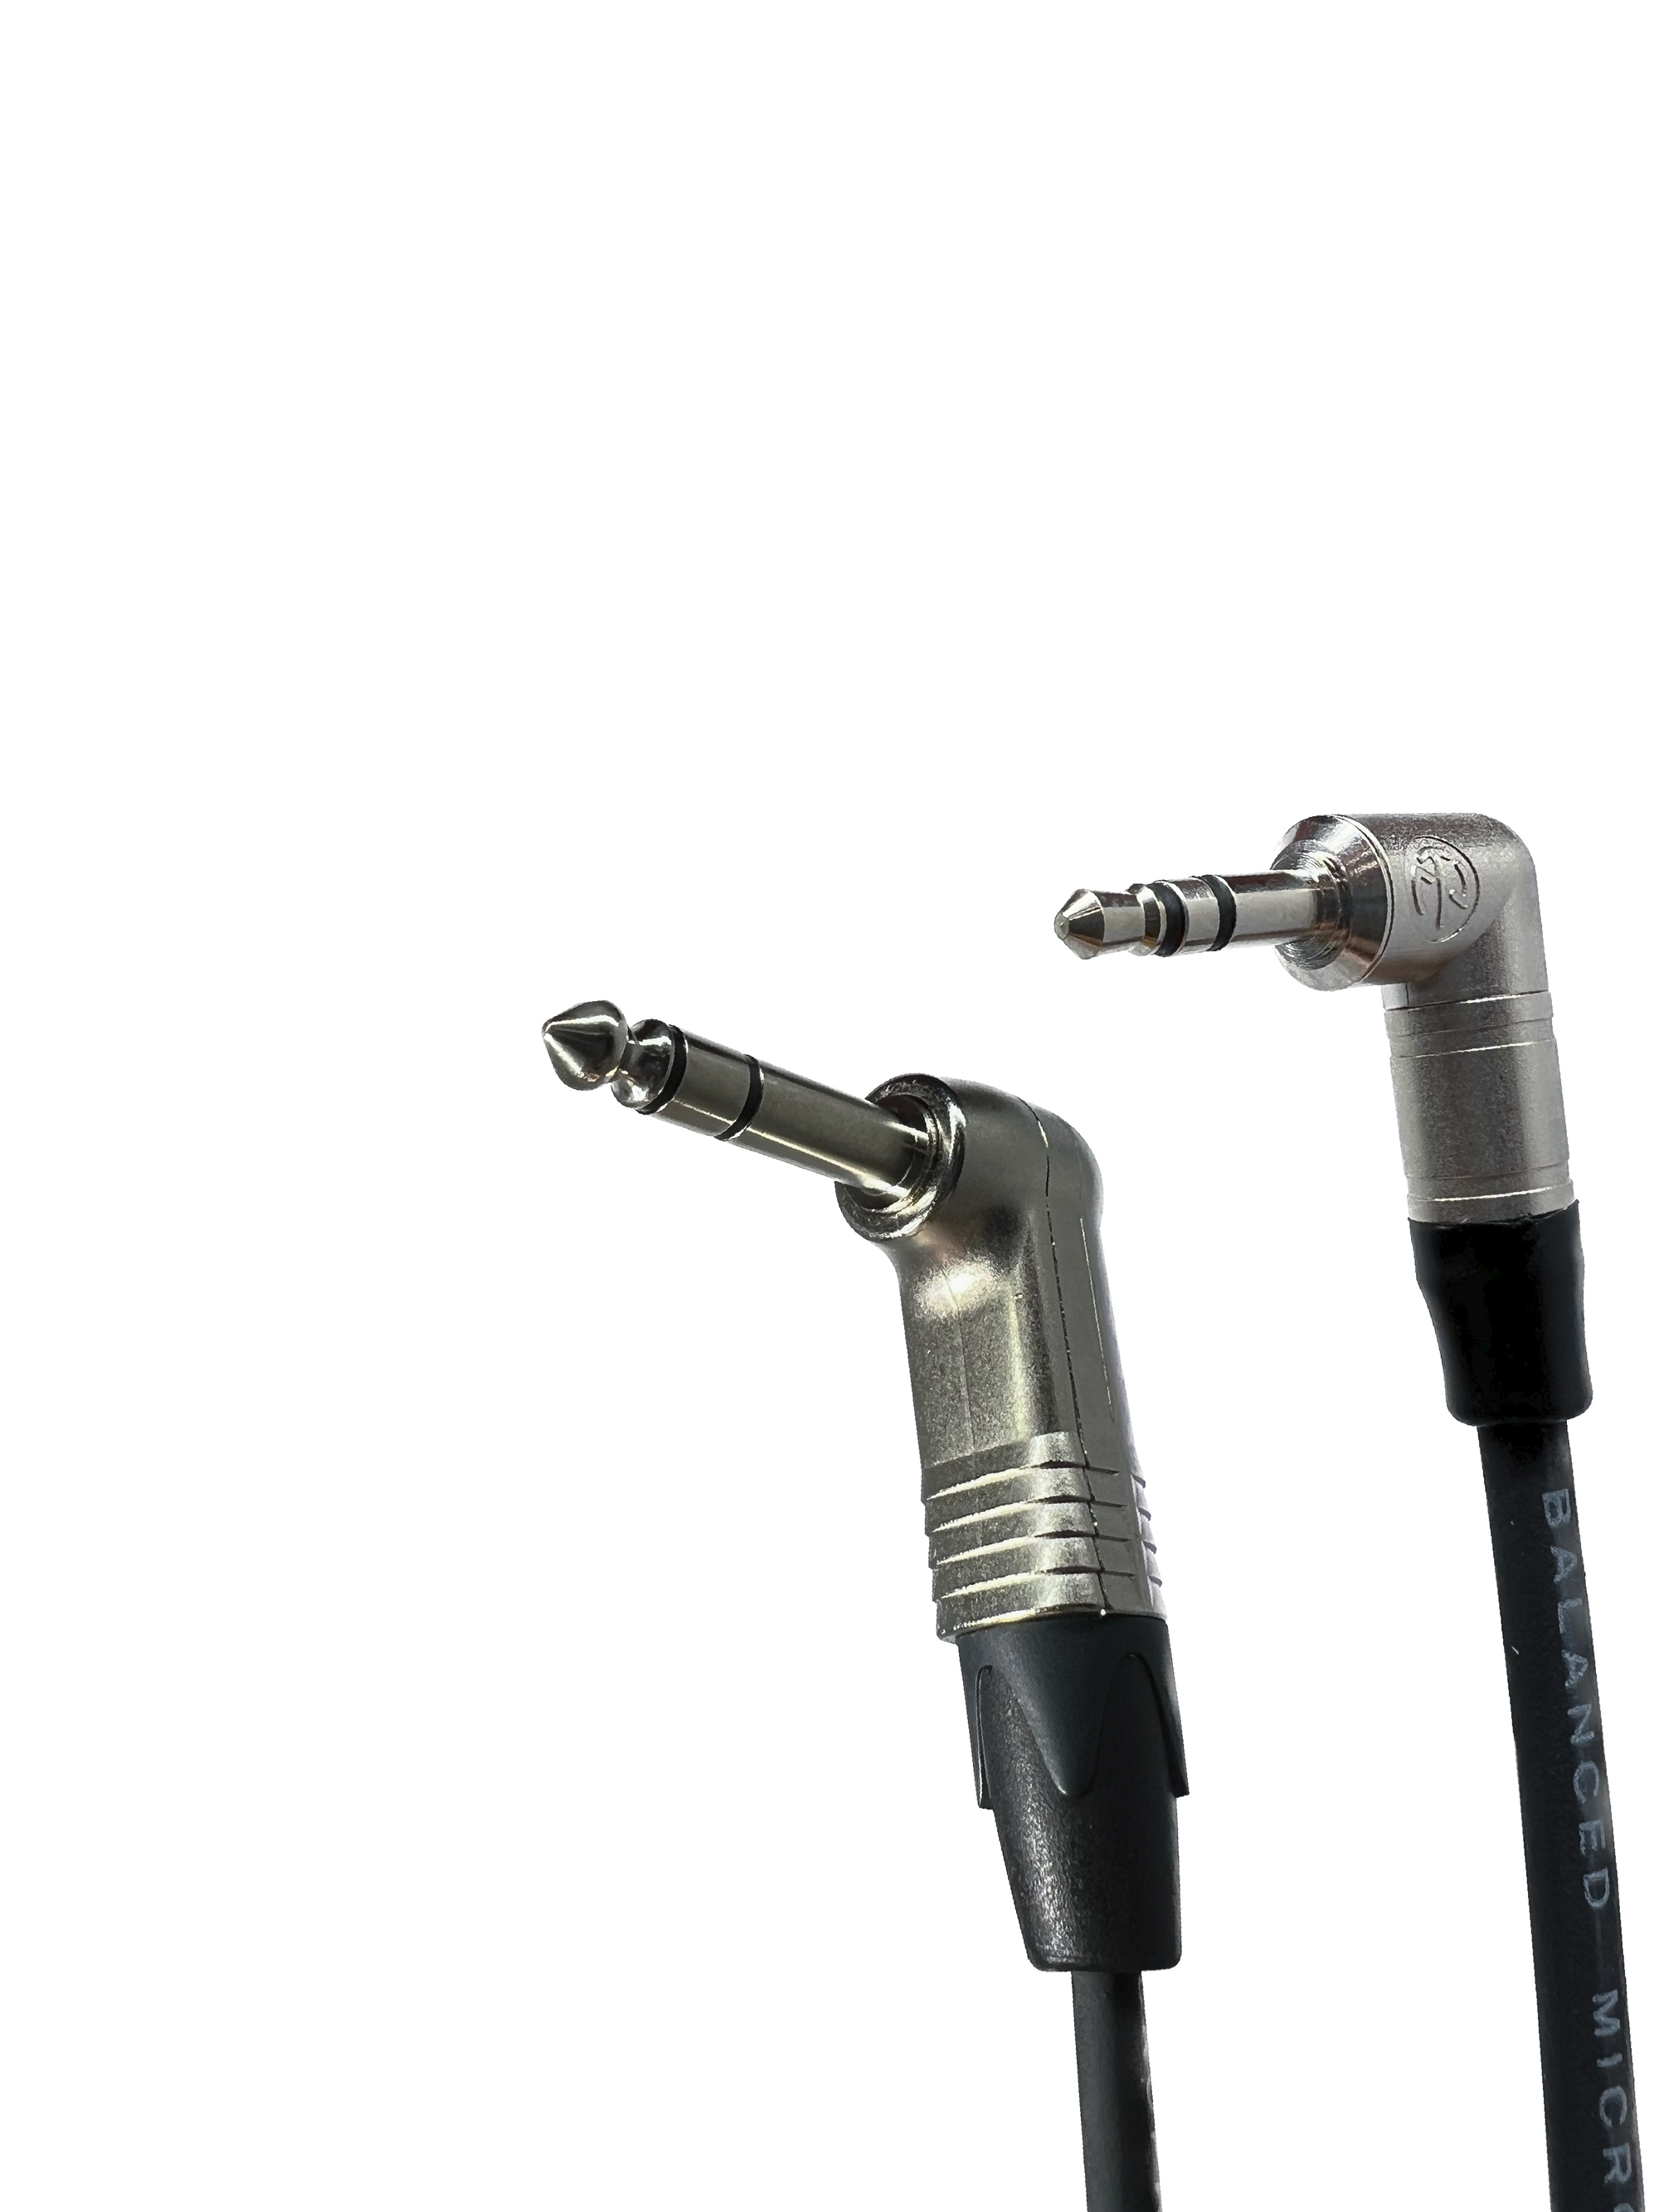 Standard Series XLR Jack to Stereo 3.5mm Mini Plug Audio Cable 3ft